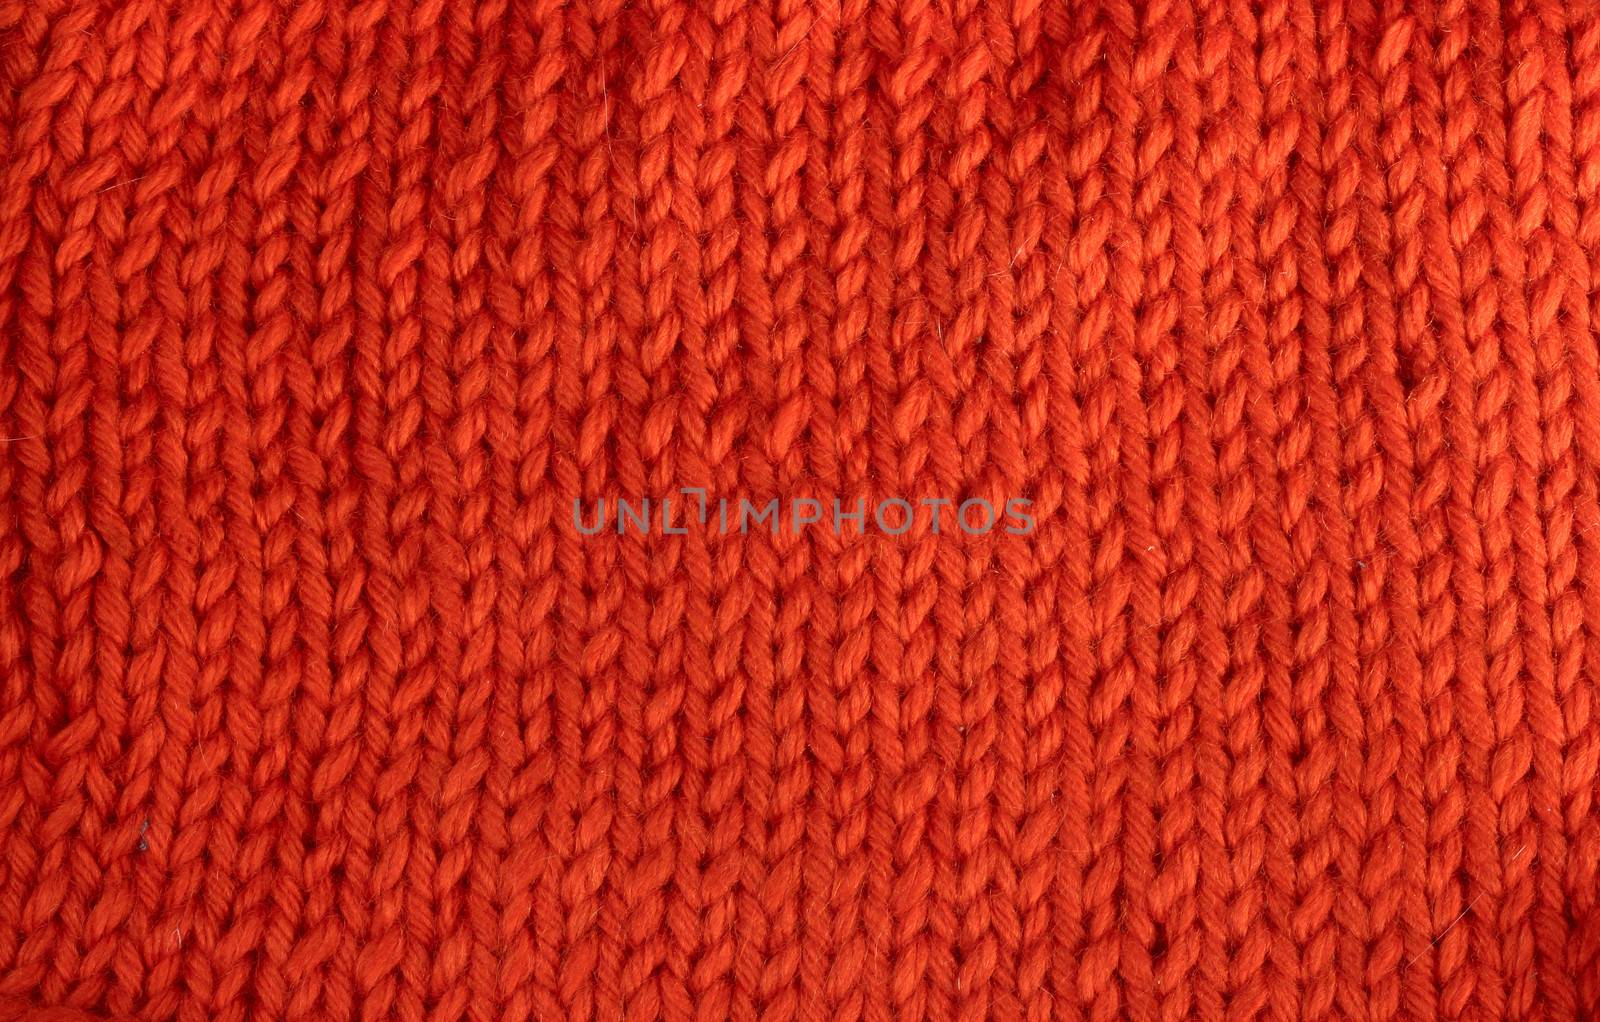 Wool knitted textured background close up